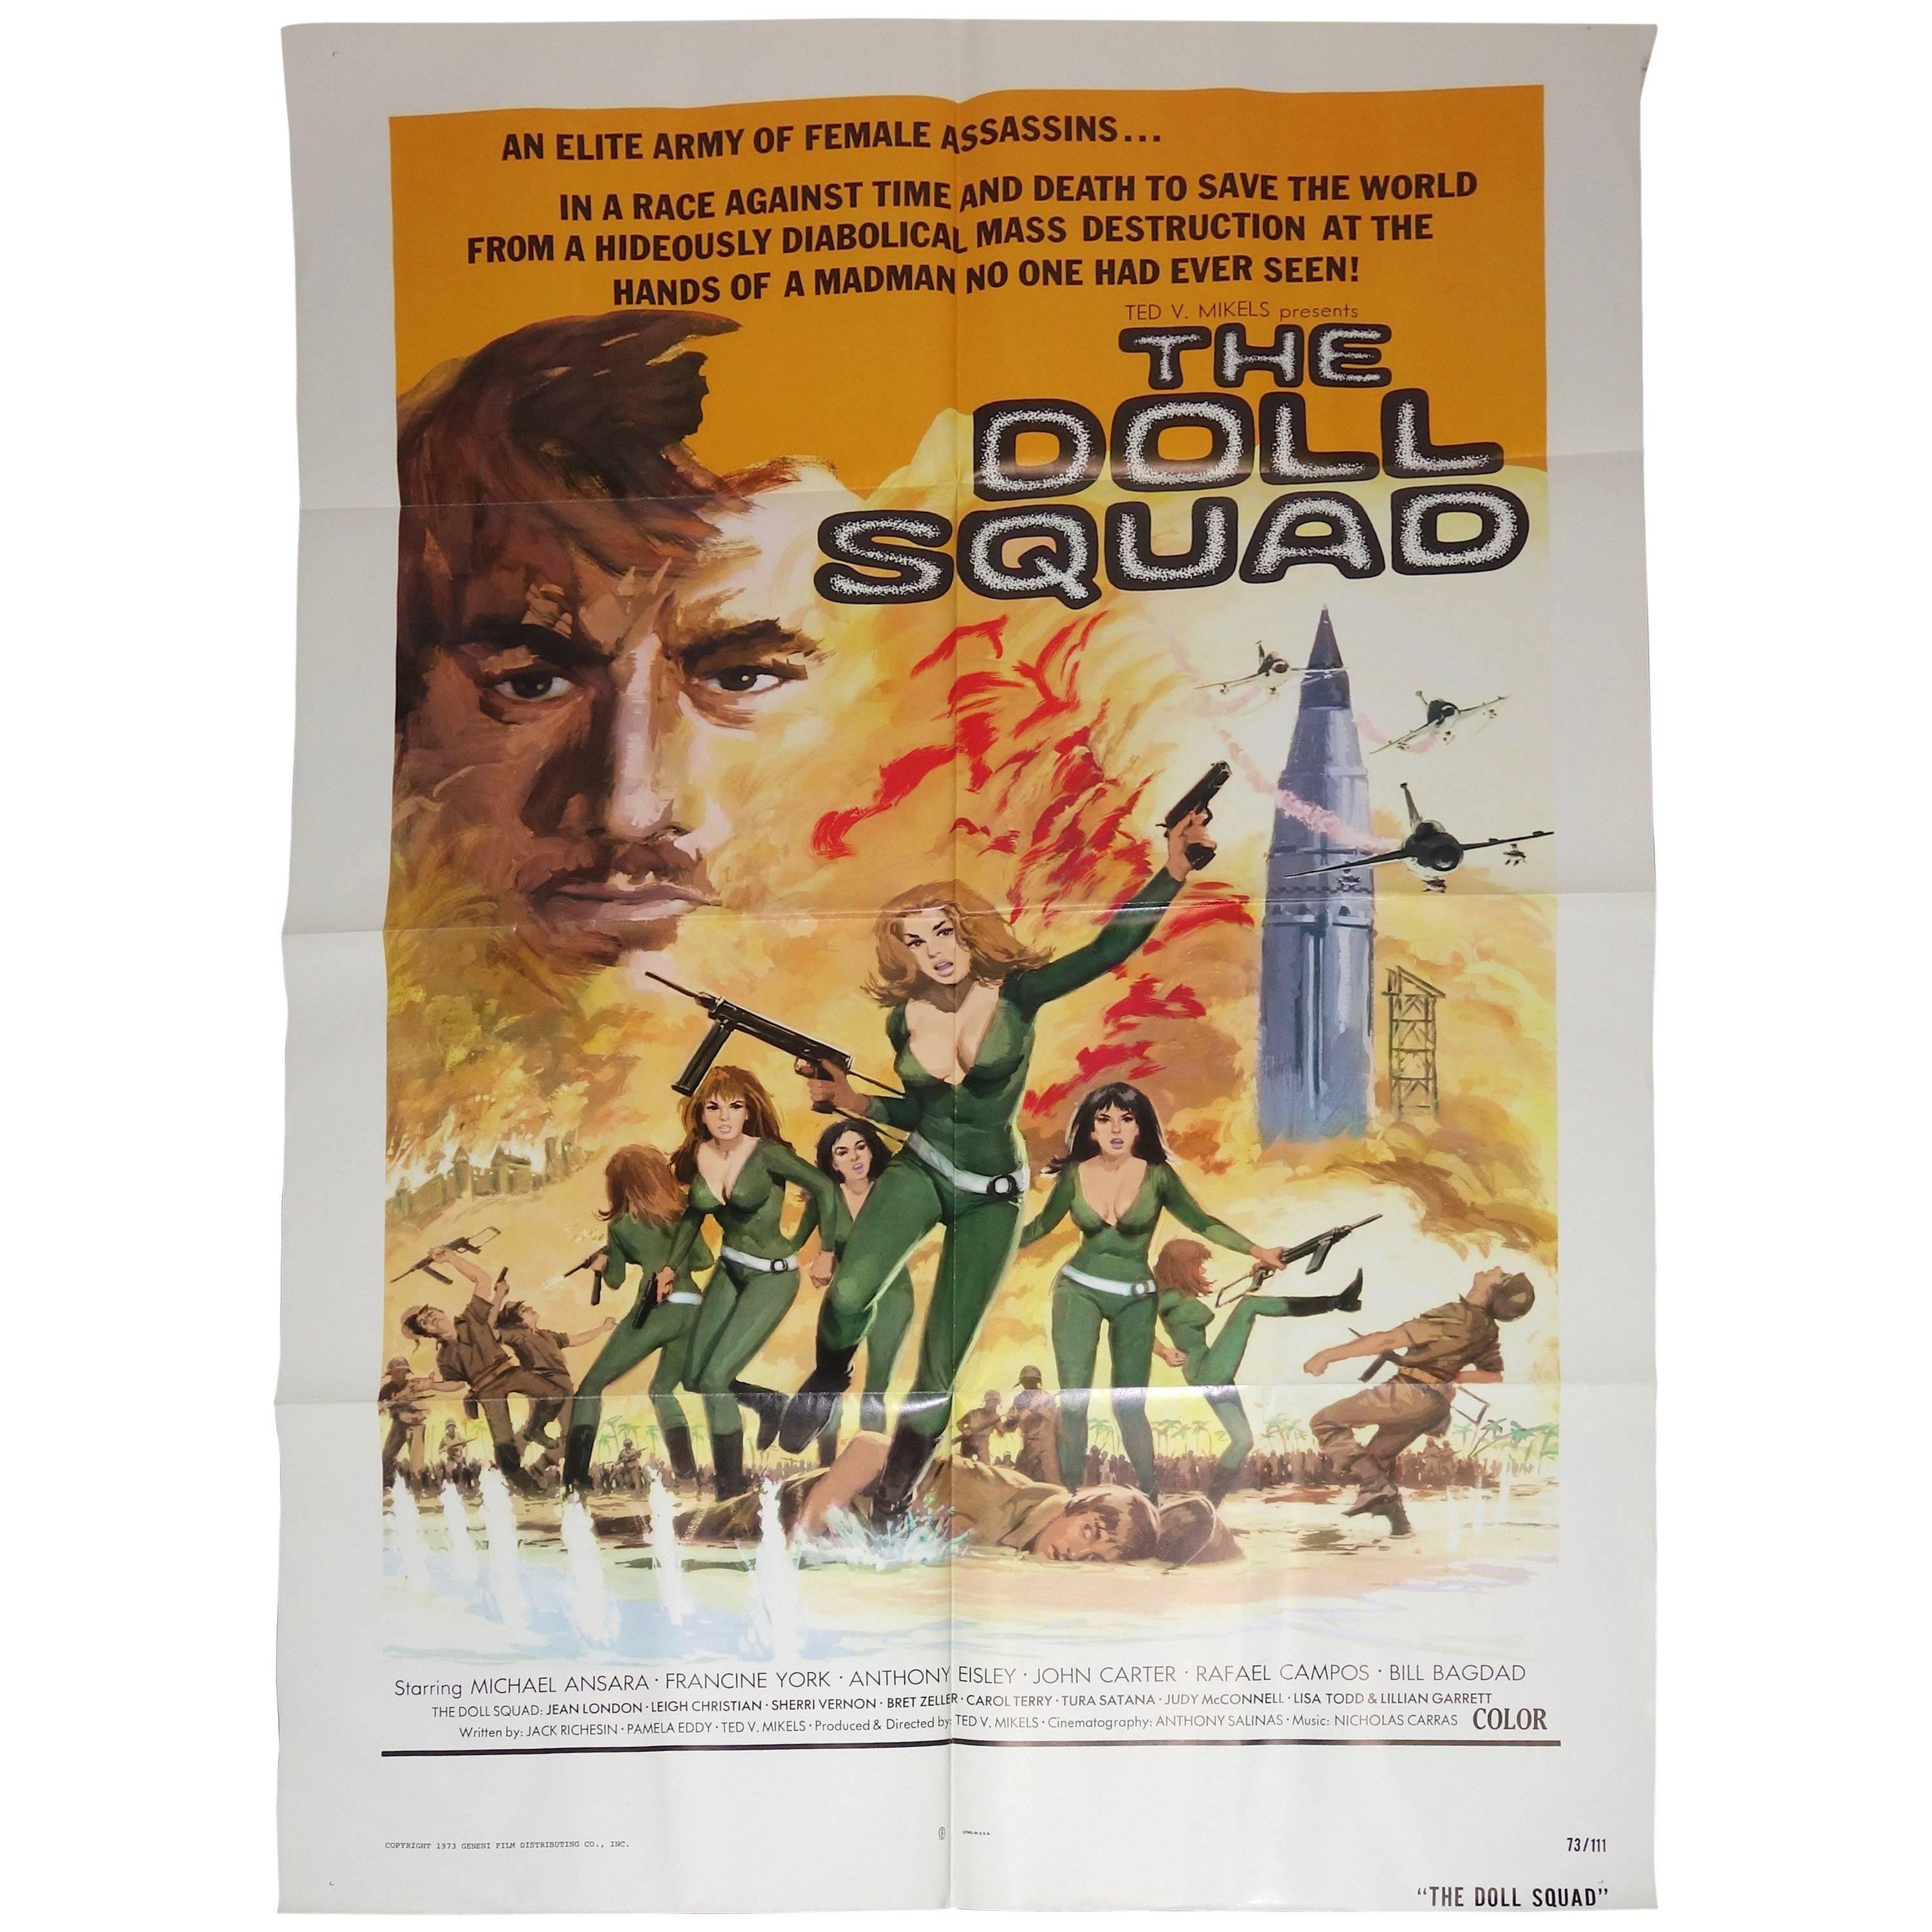 Vintage Movie Poster, Cult 'B' Movie "The Doll Squad", circa 1973, New Old Stock For Sale